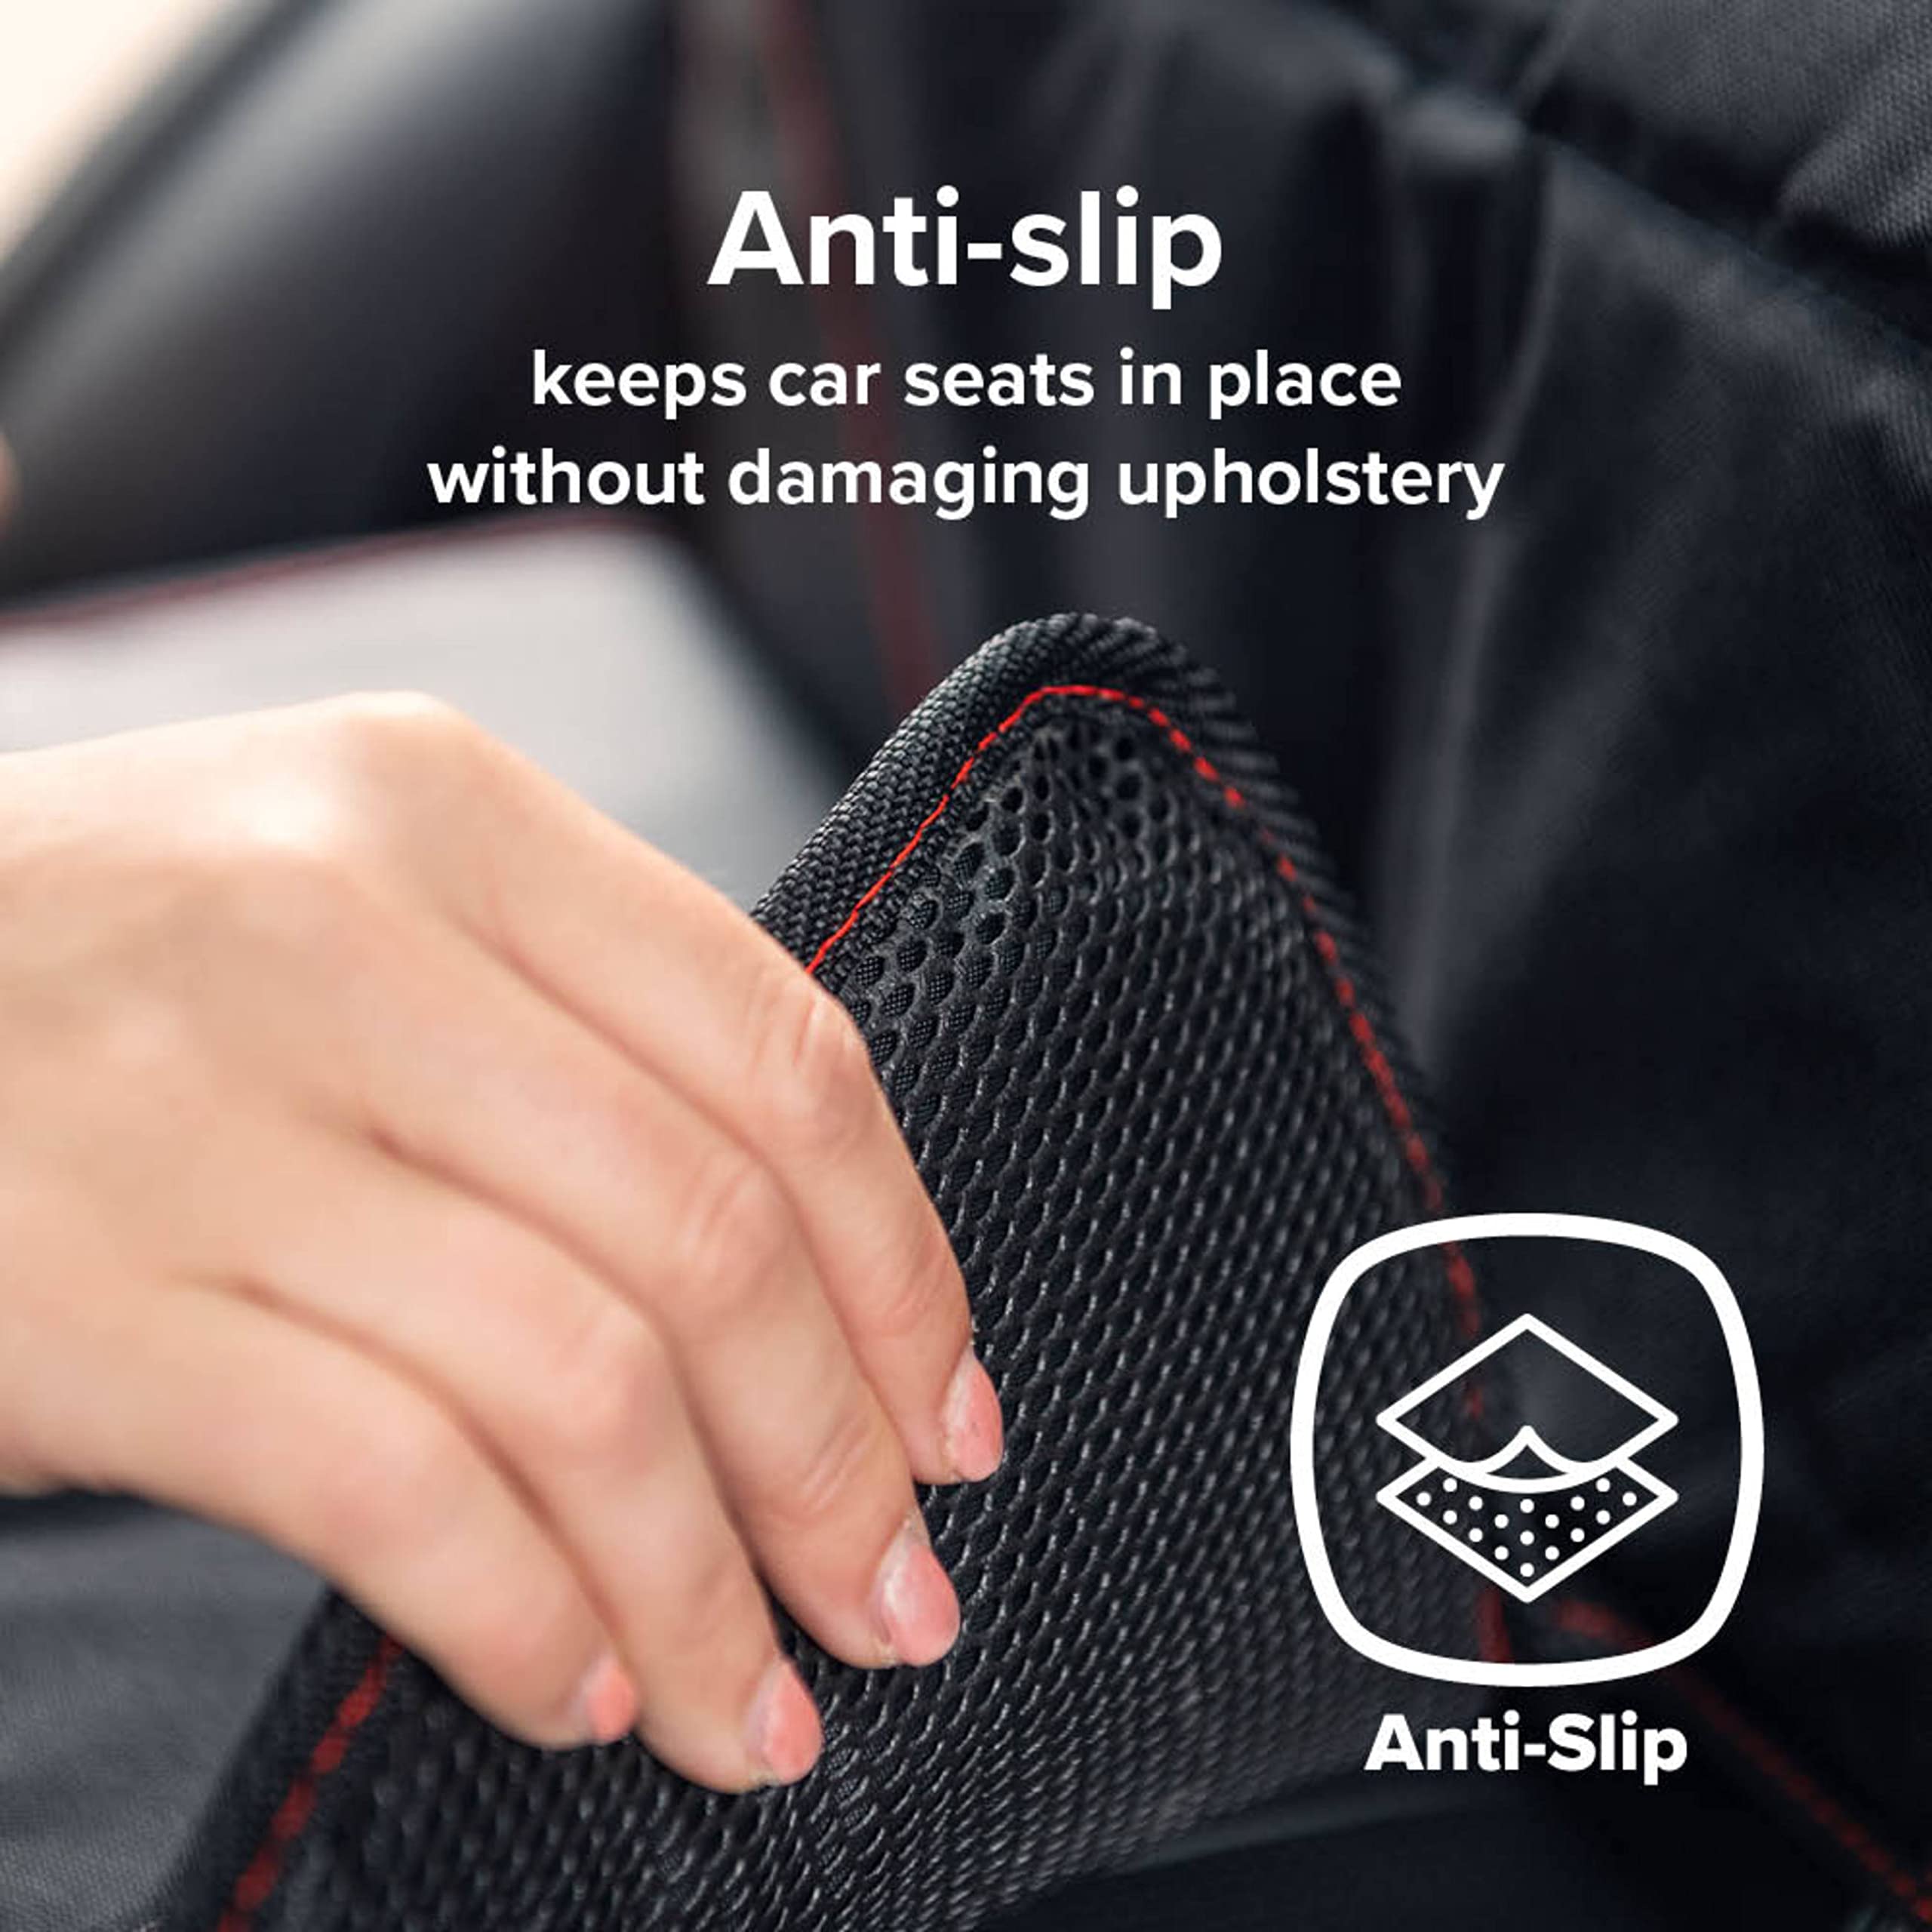 Diono Ultra Mat Complete Back Seat Upholstery Protection from Child Car Seats and Pets, Crash Tested, Premium Ultra Thick Padding, Durable, Water Resistant, Anti-Slip, 3 Mesh Storage Pockets